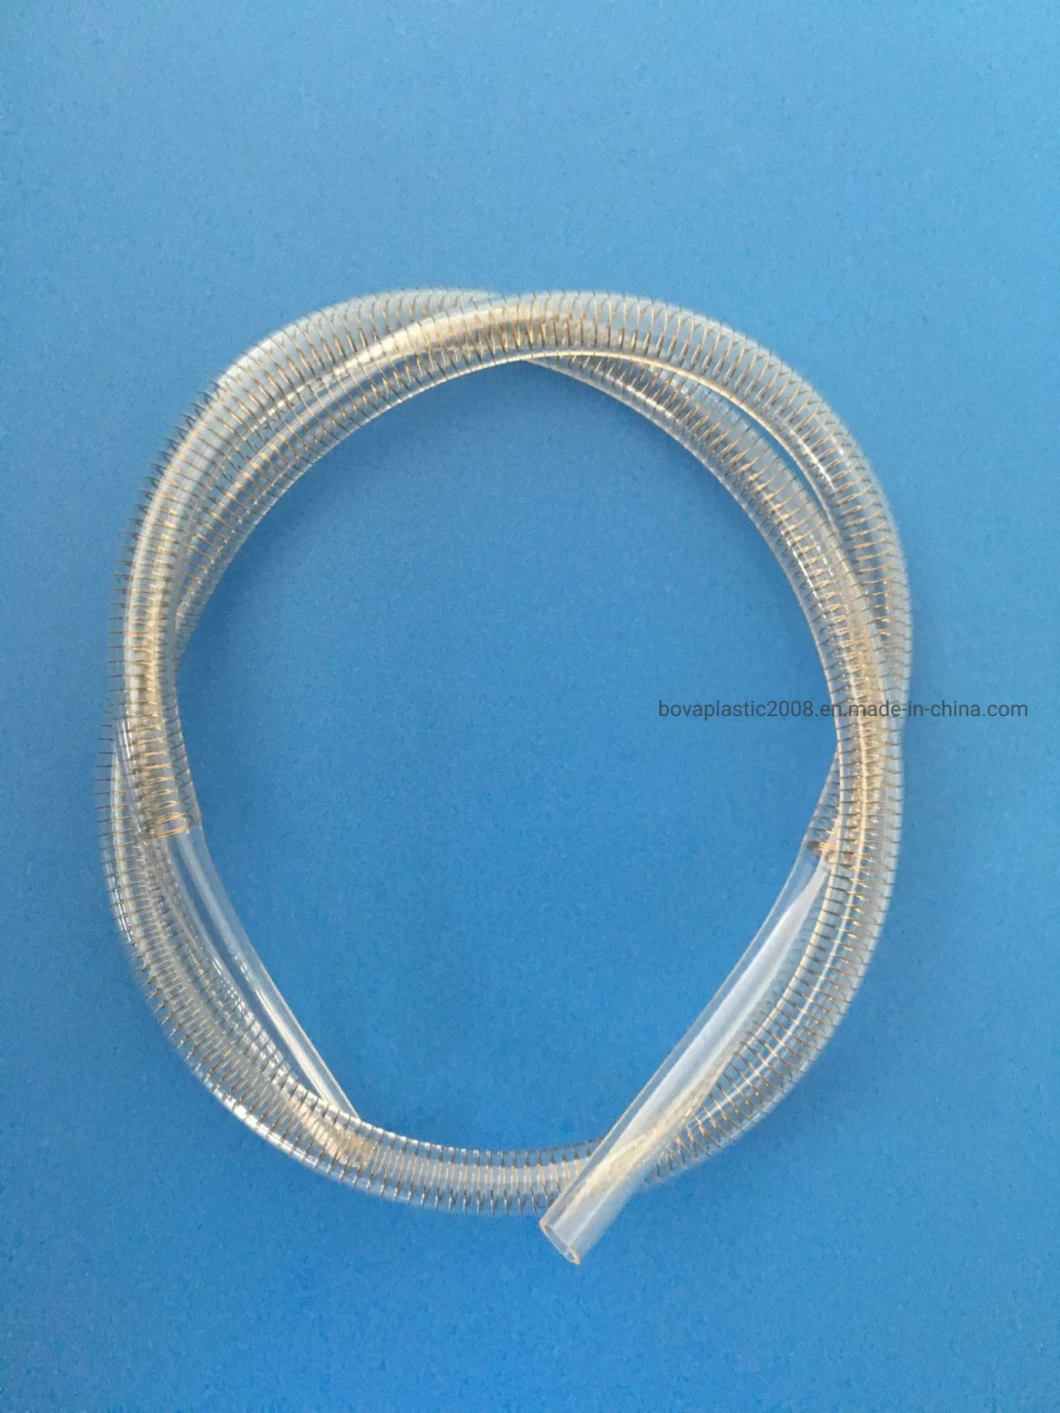 2020 Hospital Conusme Product of Catheter for Surgical Wound Edge Cover